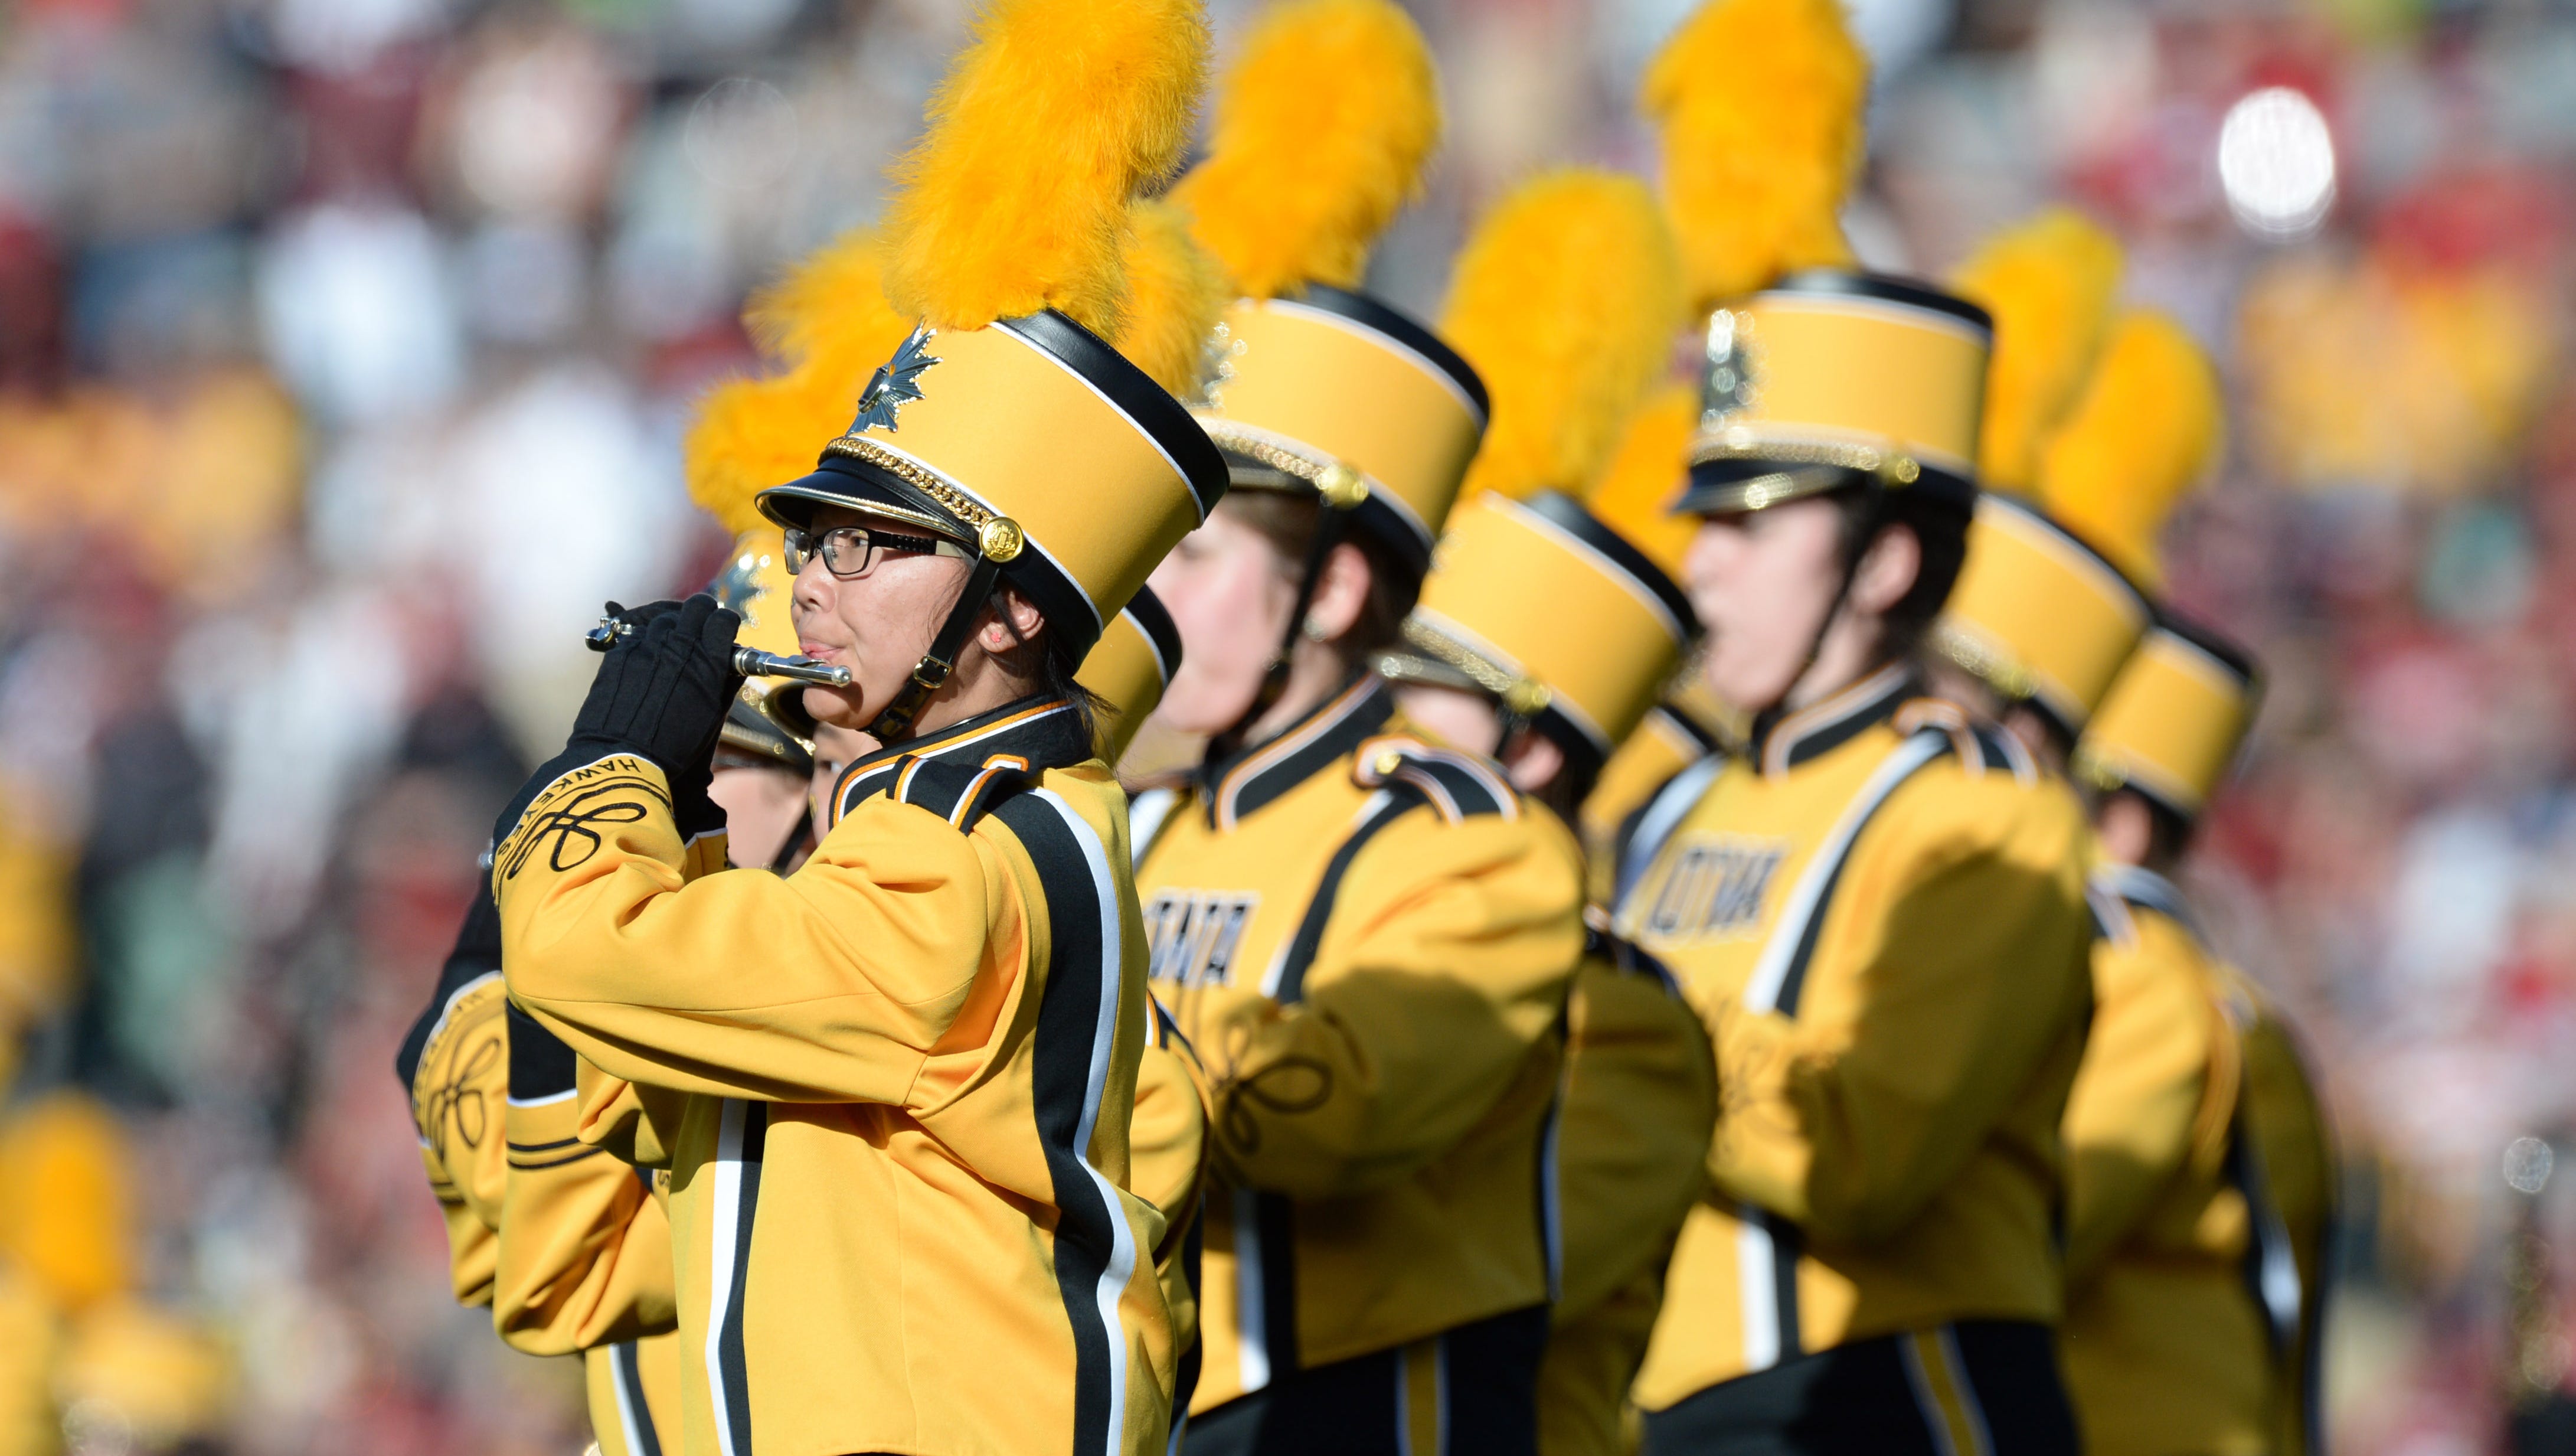 The Iowa Hawkeyes band performs before the game between the Iowa Hawkeyes and the Stanford Cardinal in the 2016 Rose Bowl at Rose Bowl.